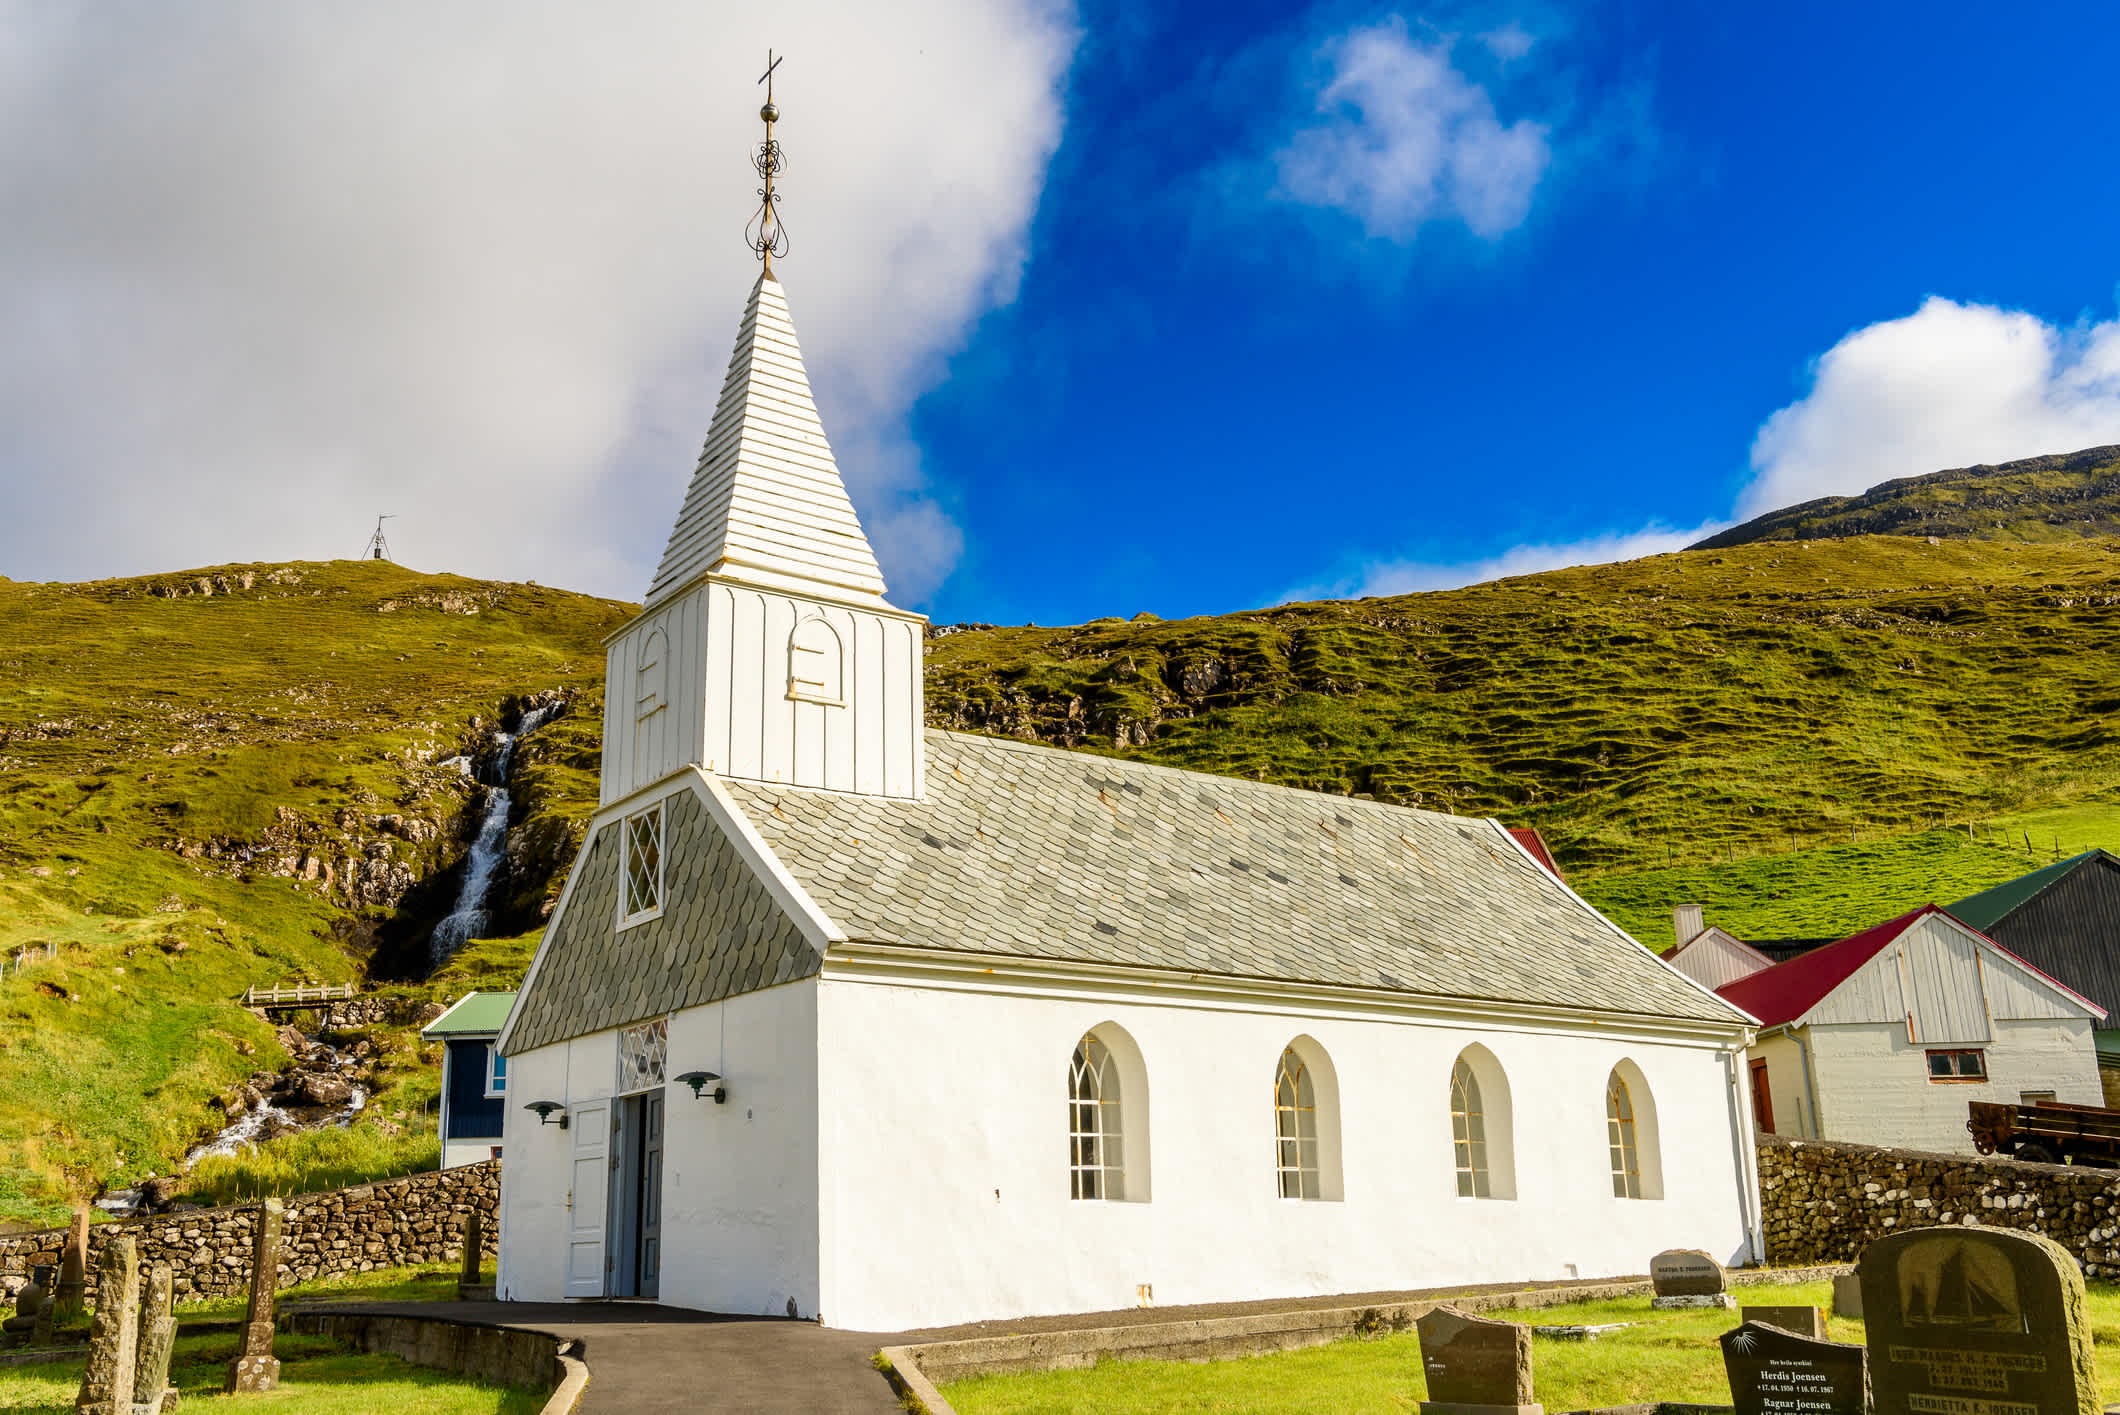 Christian faith is deeply rooted in the Faroe Islands and shapes the culture